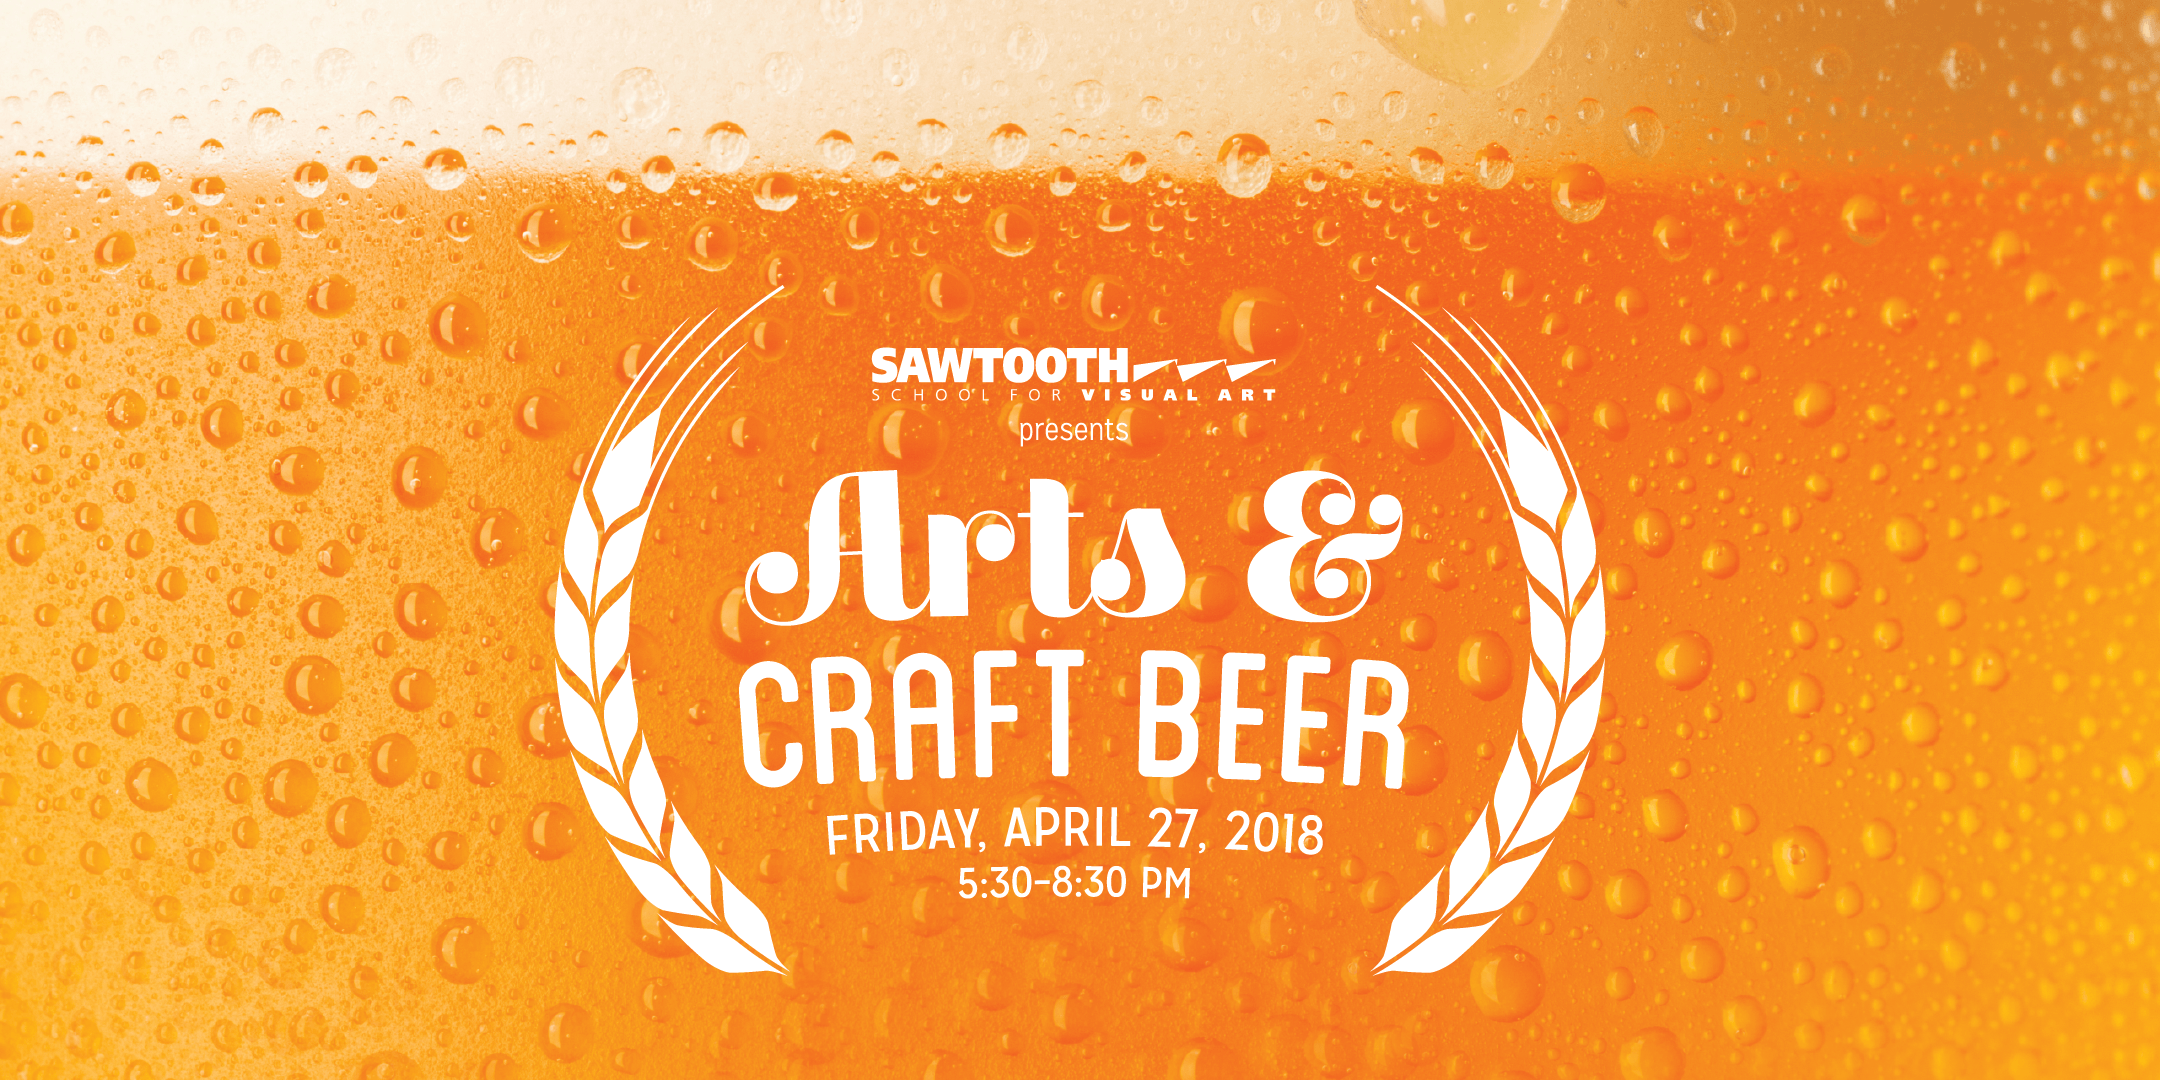 Sawtooth School Logo - Get your tickets for Arts & Craft Beer! | Sawtooth School for Visual Art